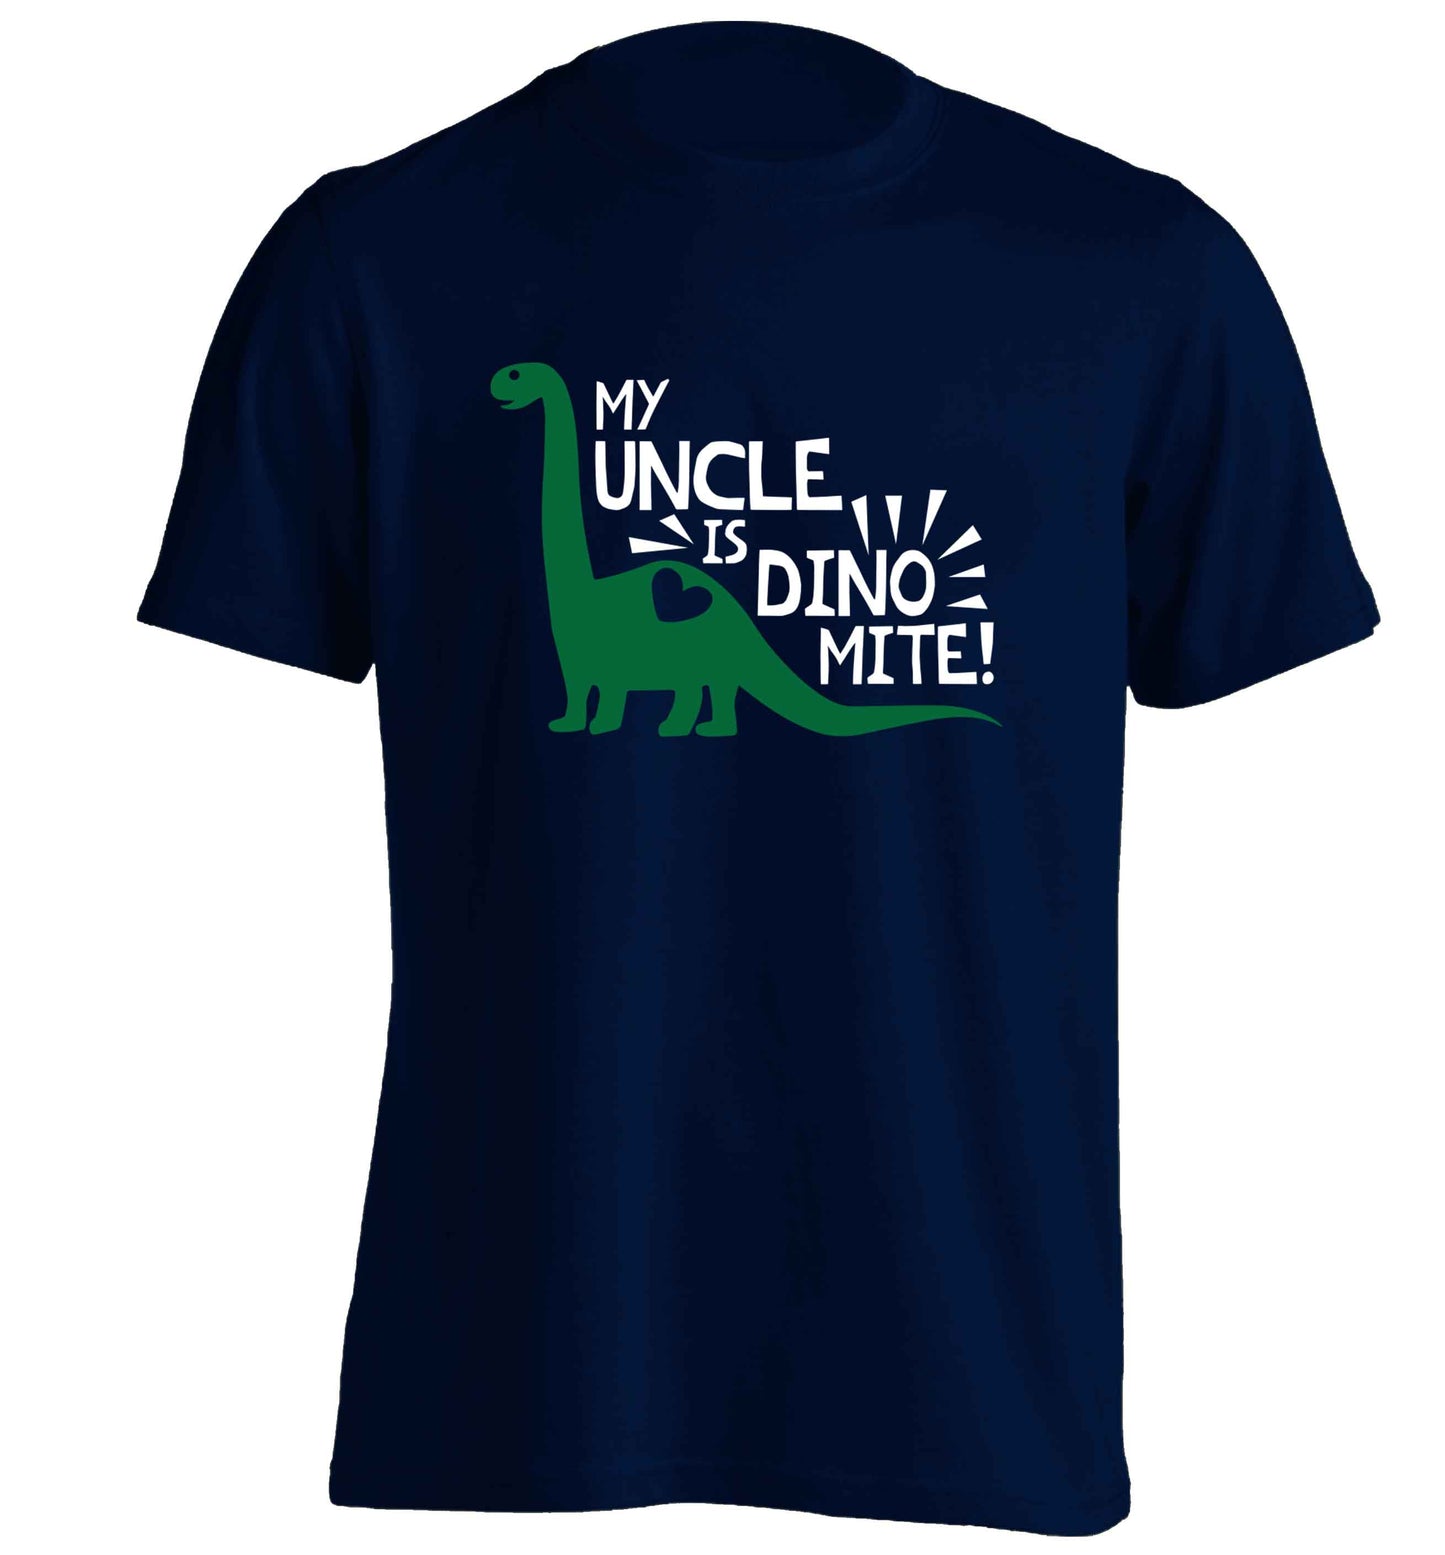 My uncle is dinomite! adults unisex navy Tshirt 2XL